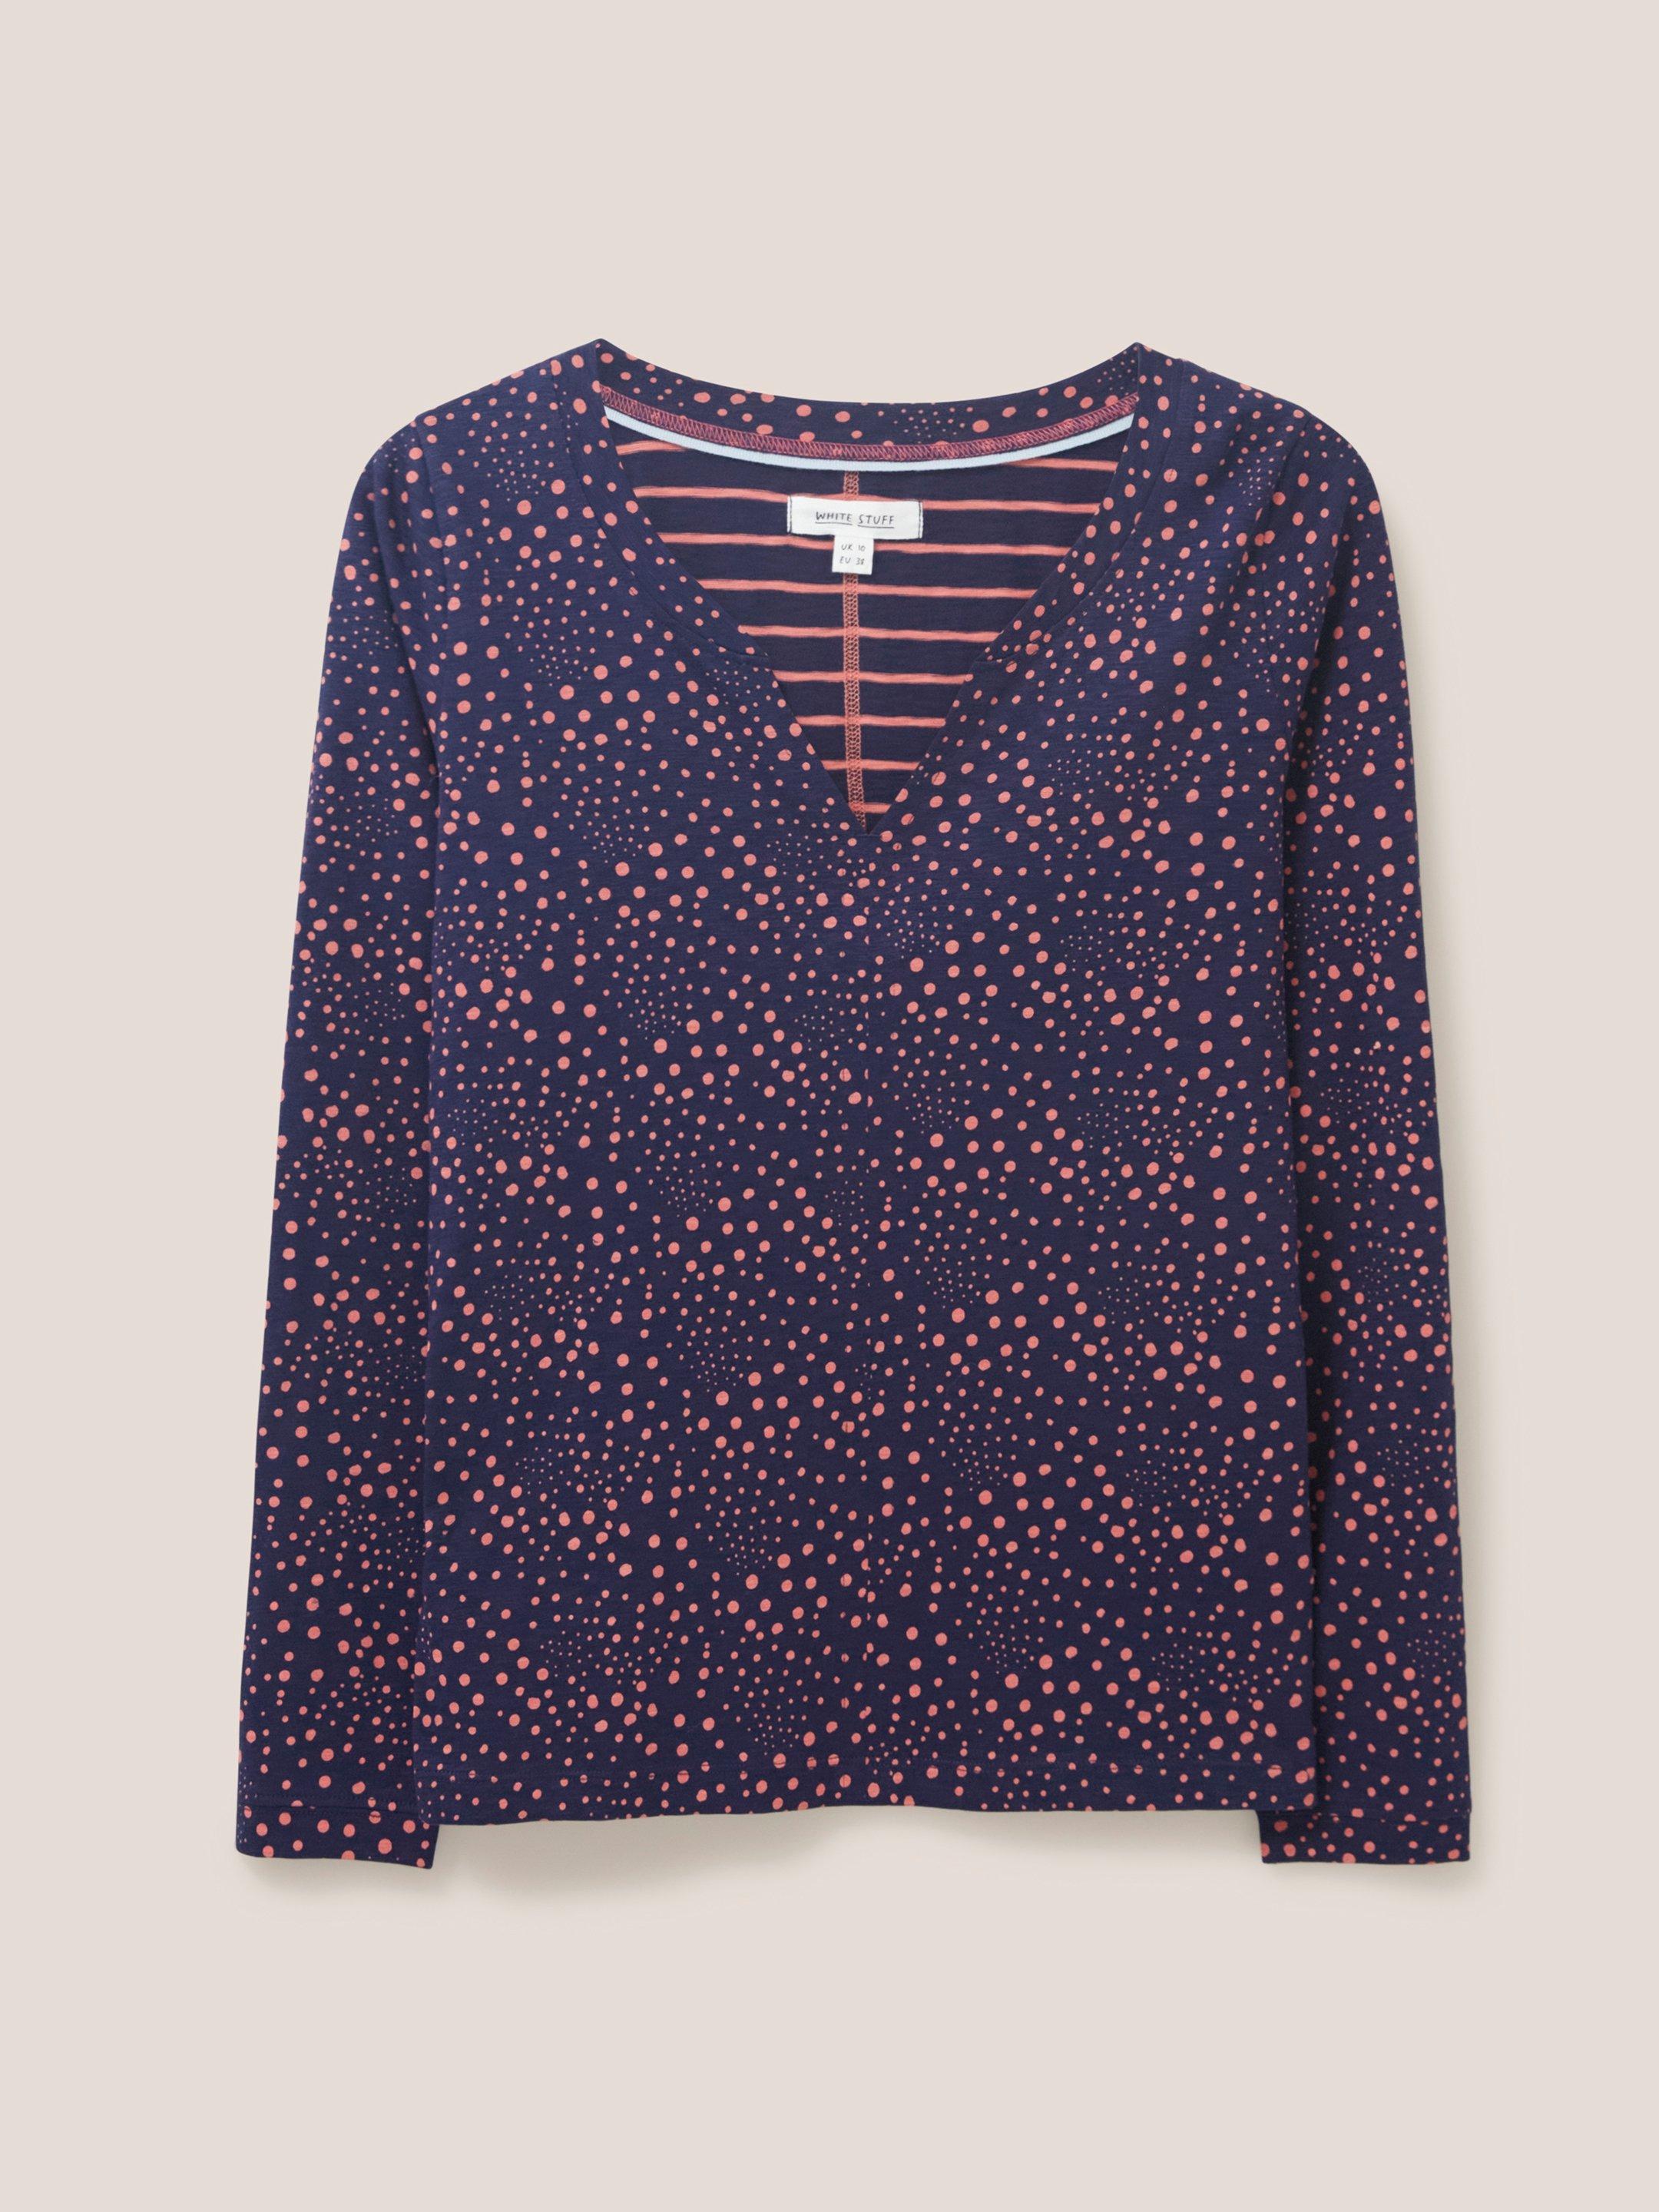 Nelly Long Sleeve T-Shirt in NAVY MULTI - FLAT FRONT